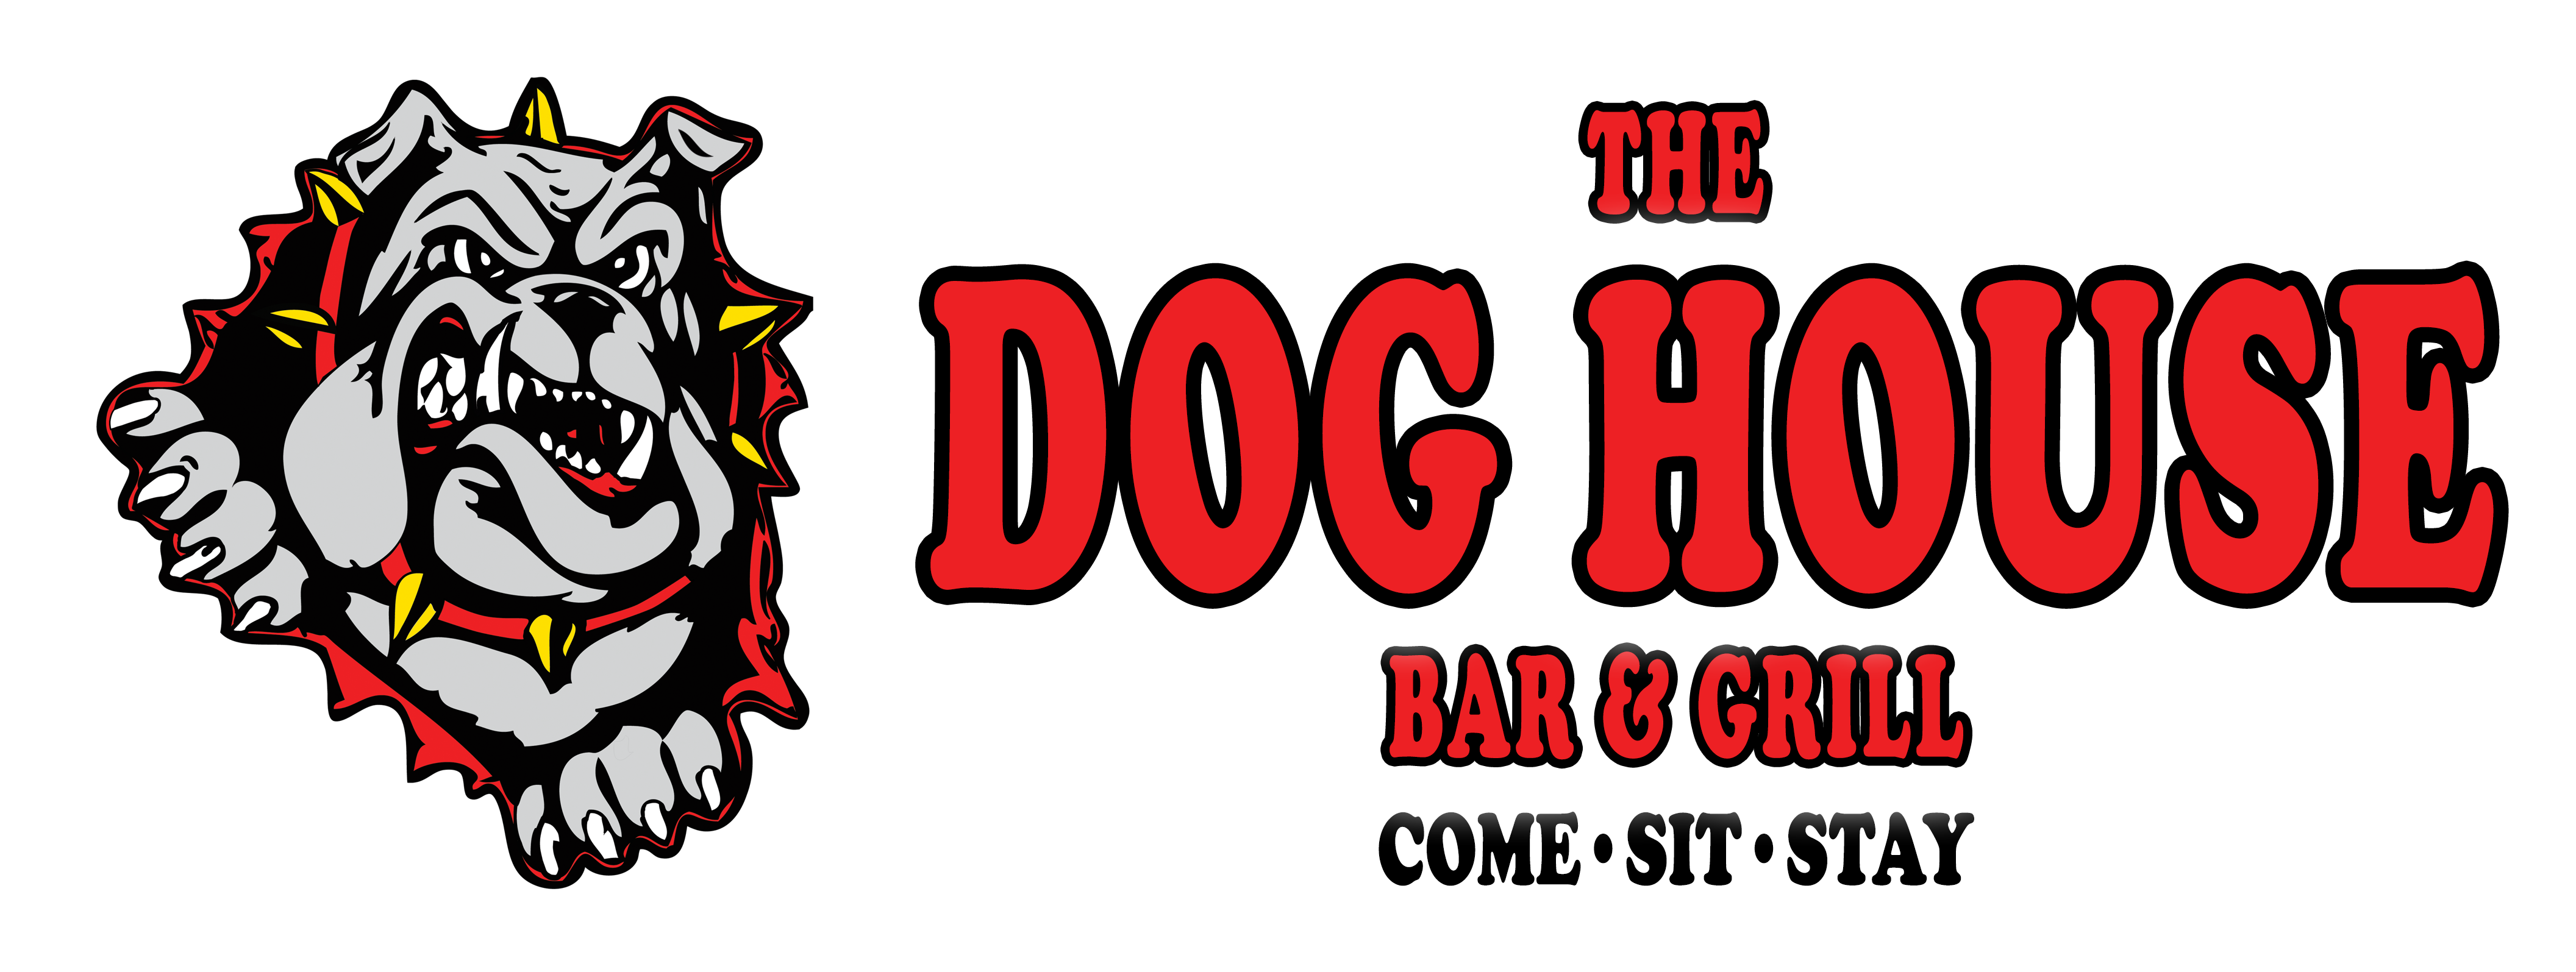 22 Dog house bar and grill avon lake info